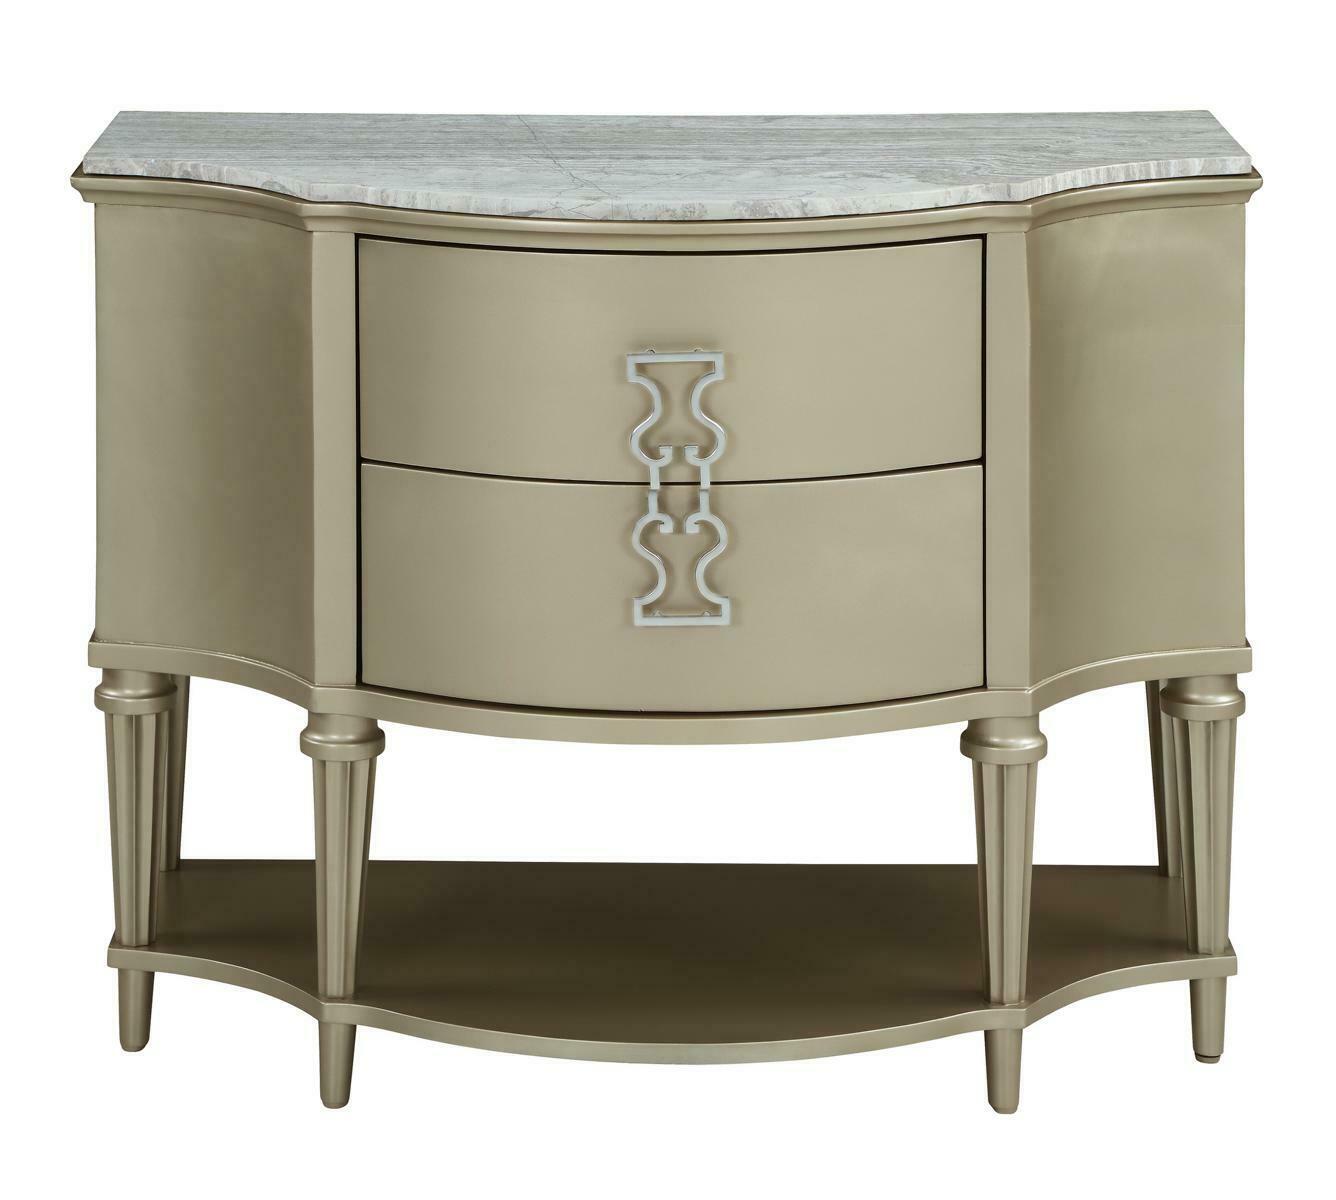 Luxury Chest of Drawers Modern Sideboard Cabinet Furnishing Living Room Furniture Chests of Drawers